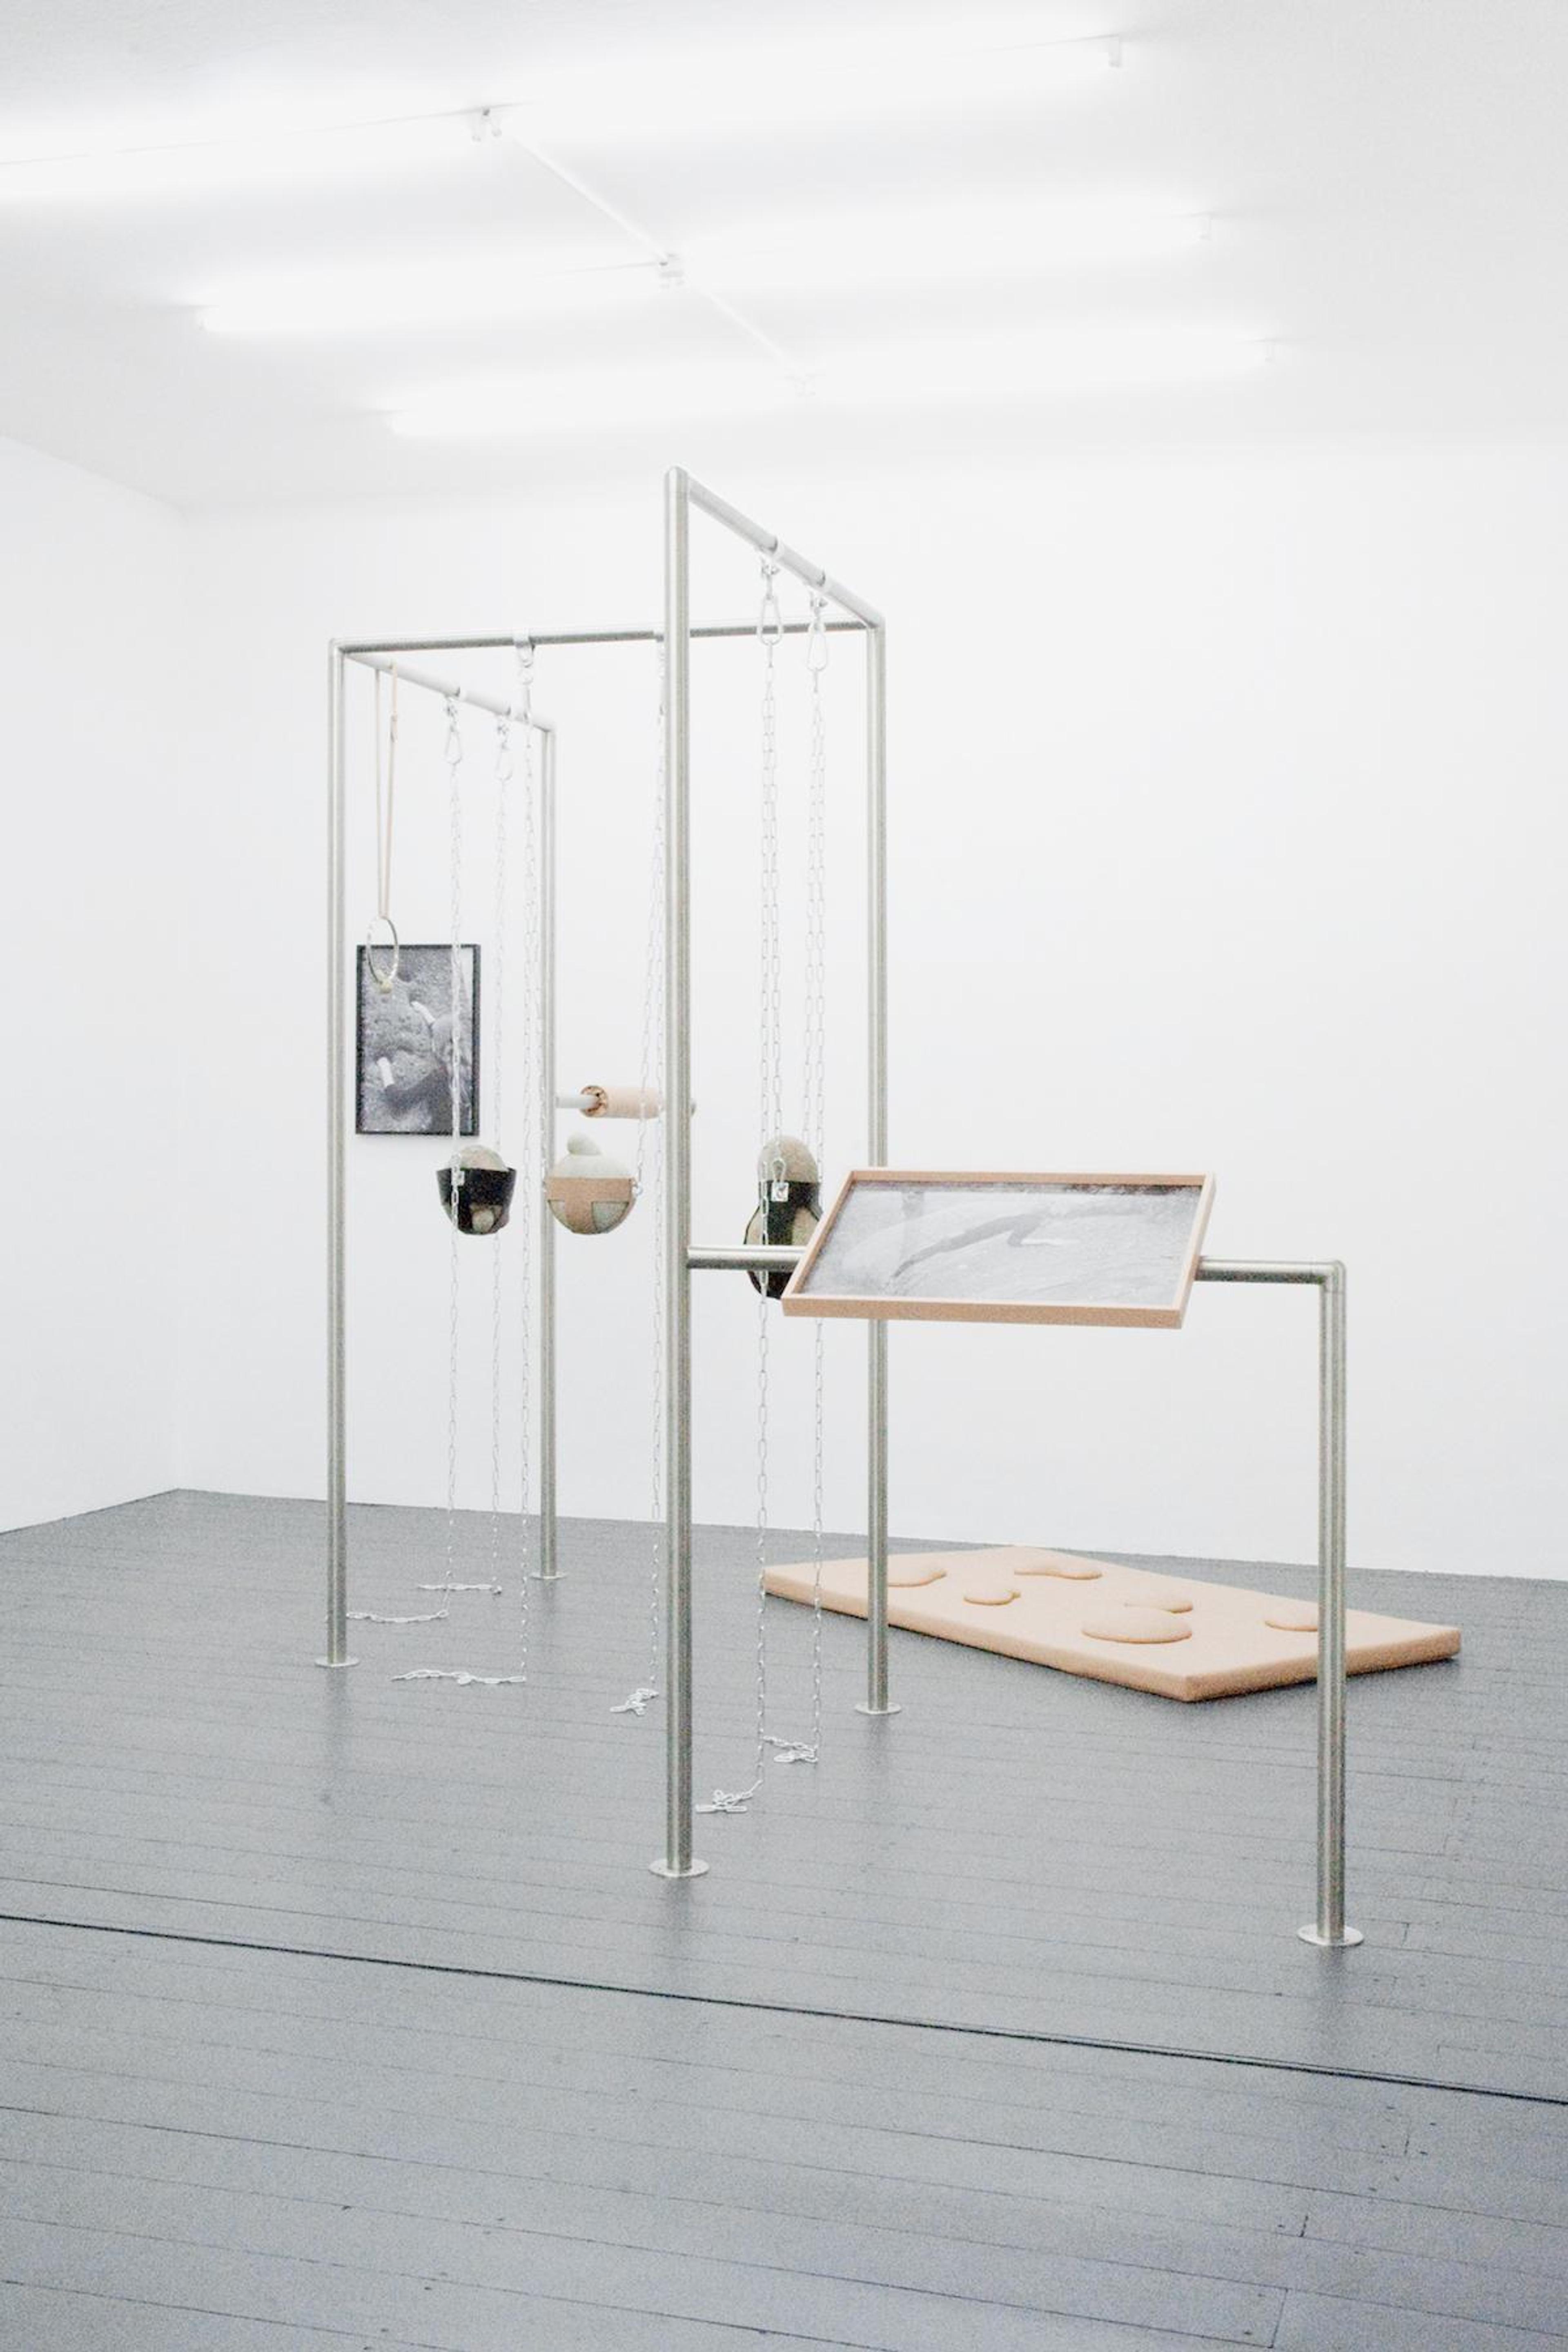 Installation view at Exile Gallery, Berlin